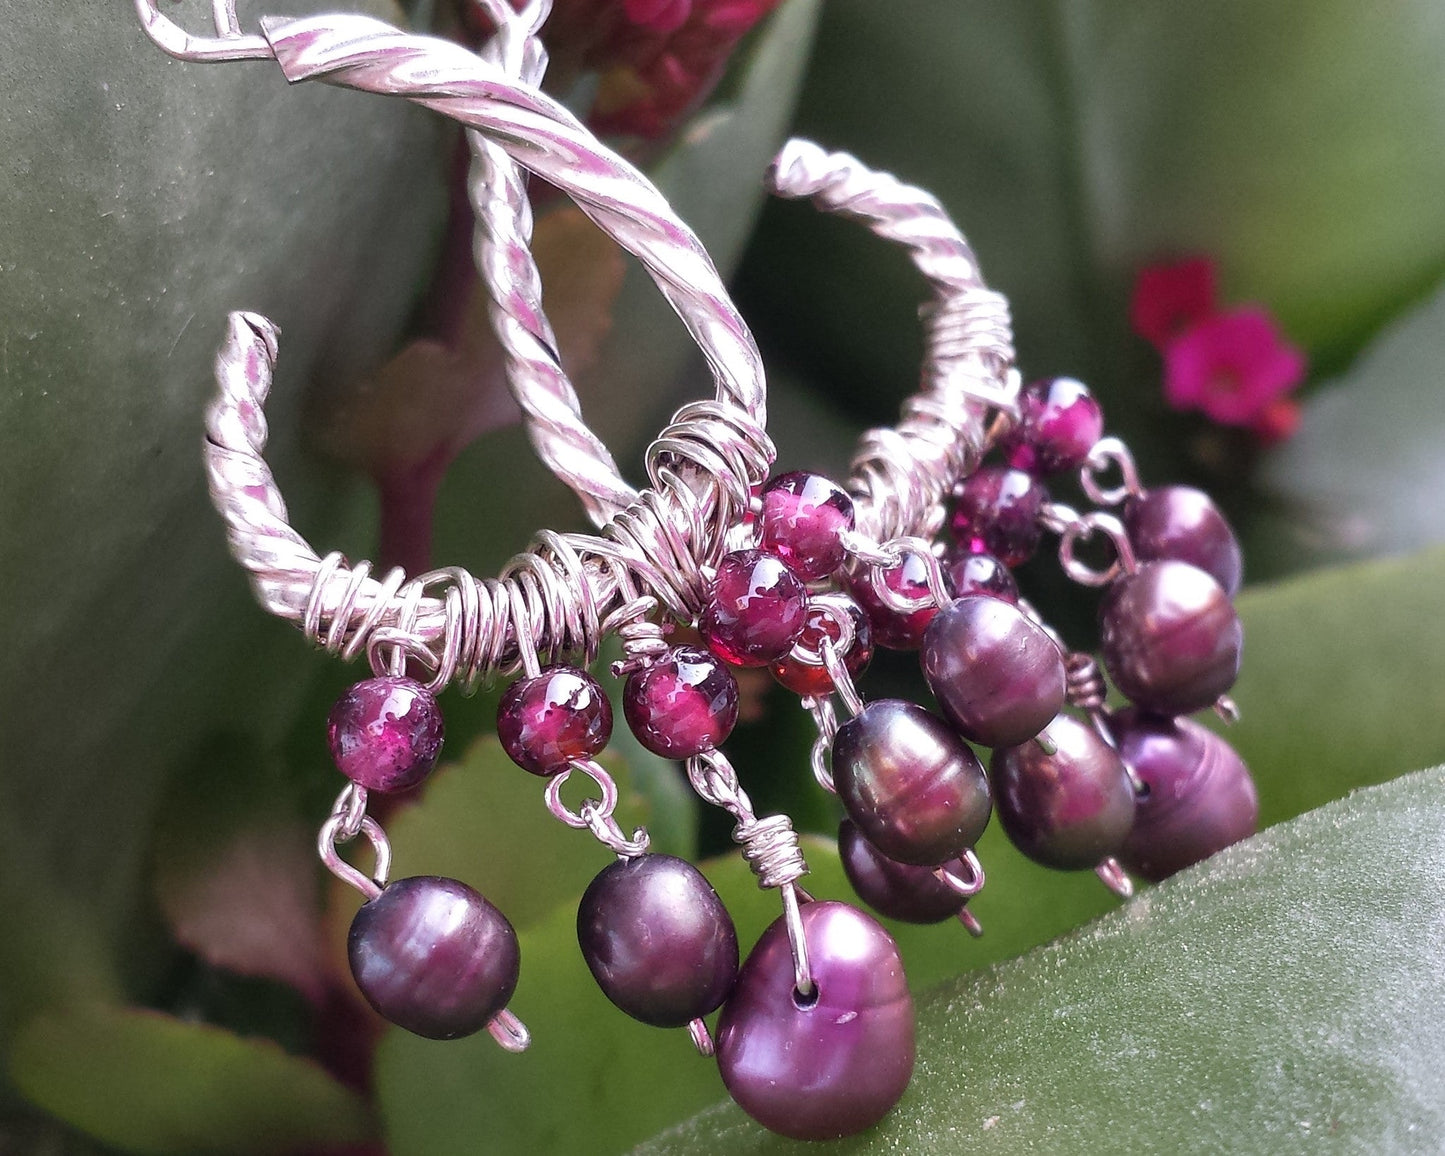 Long Garnet Pearl Chandlier Earrings, wire wrapped Sterling Silver, Garnets, and Freshwater Cultured Pearls.